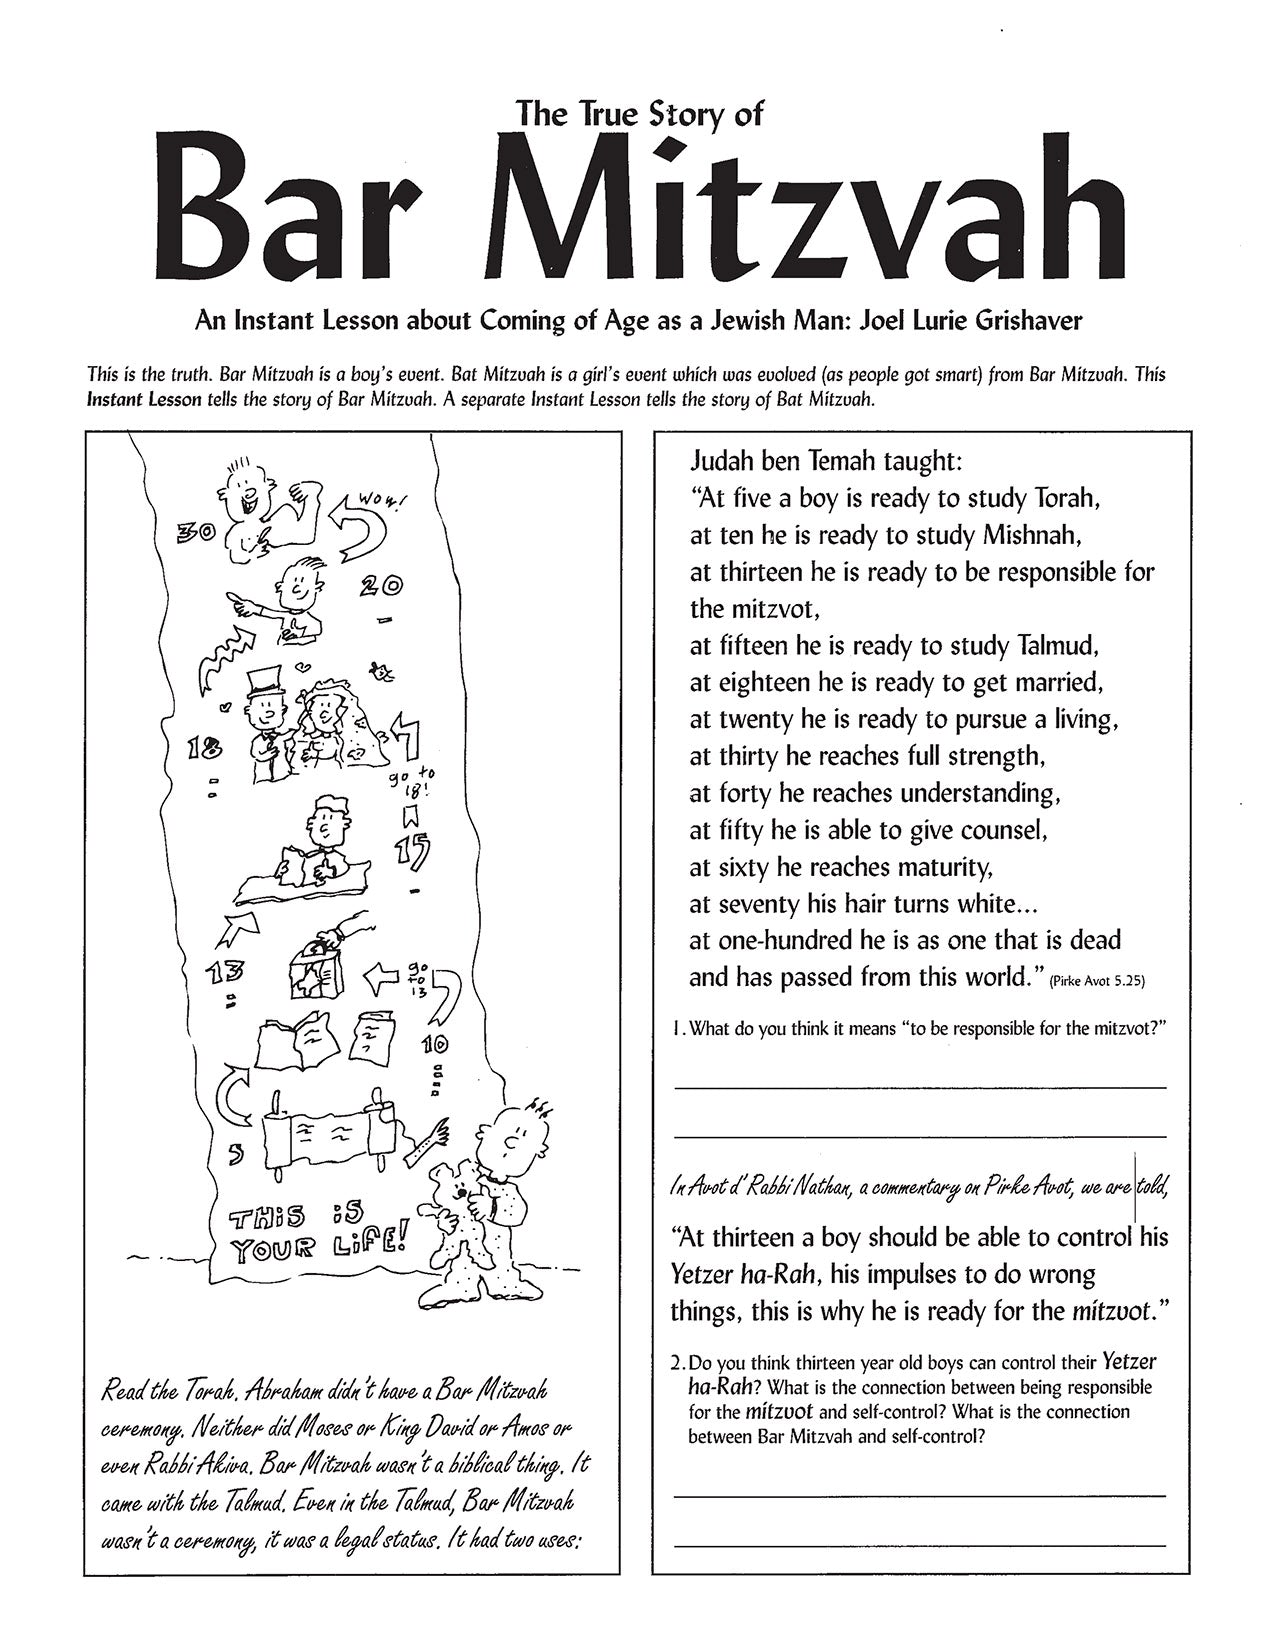 The True Story of Bar Mitzvah